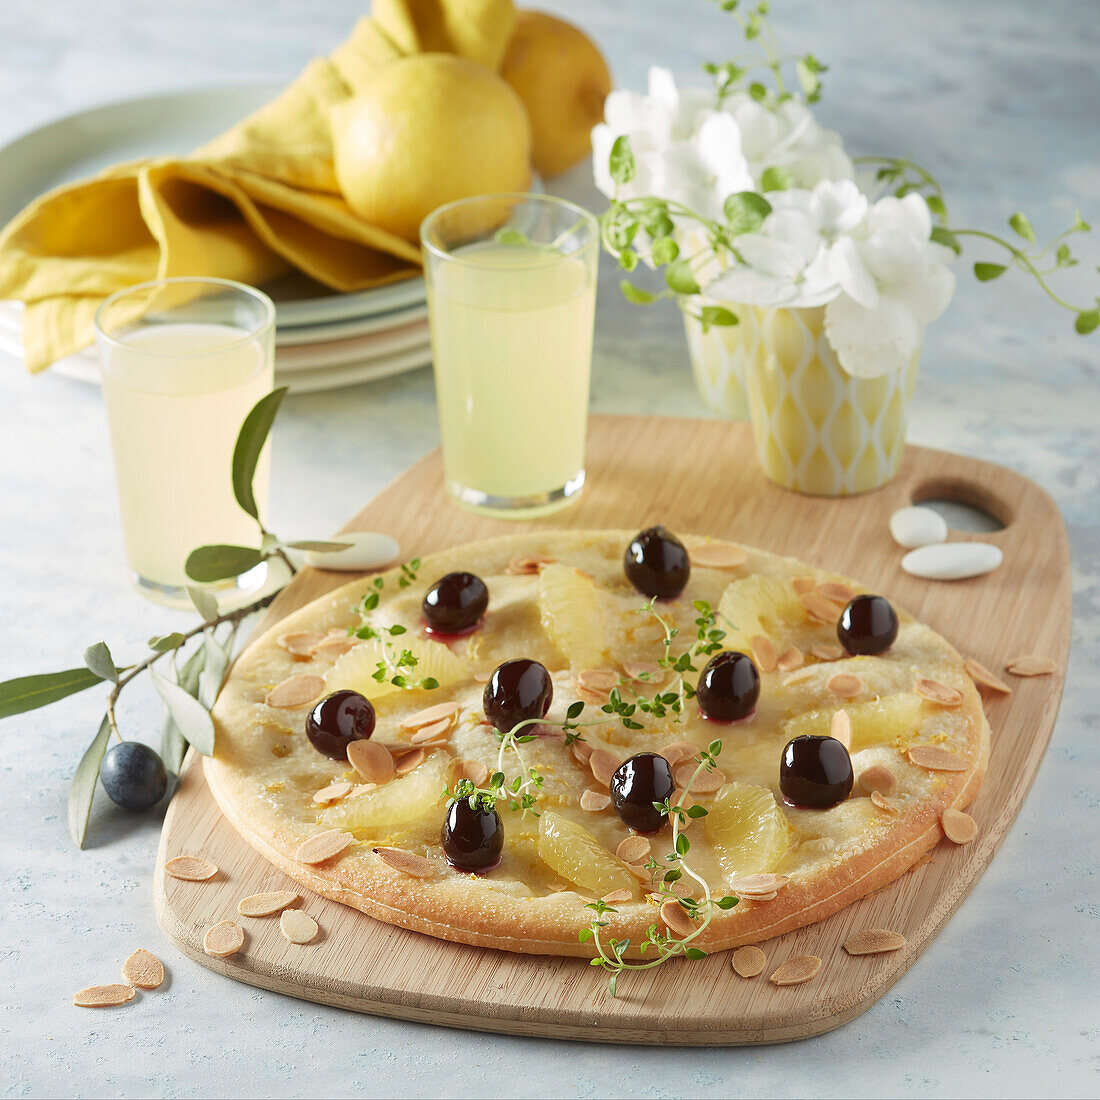 Sweet pizza limoncello with lemon wedges, amarena cherries and almonds